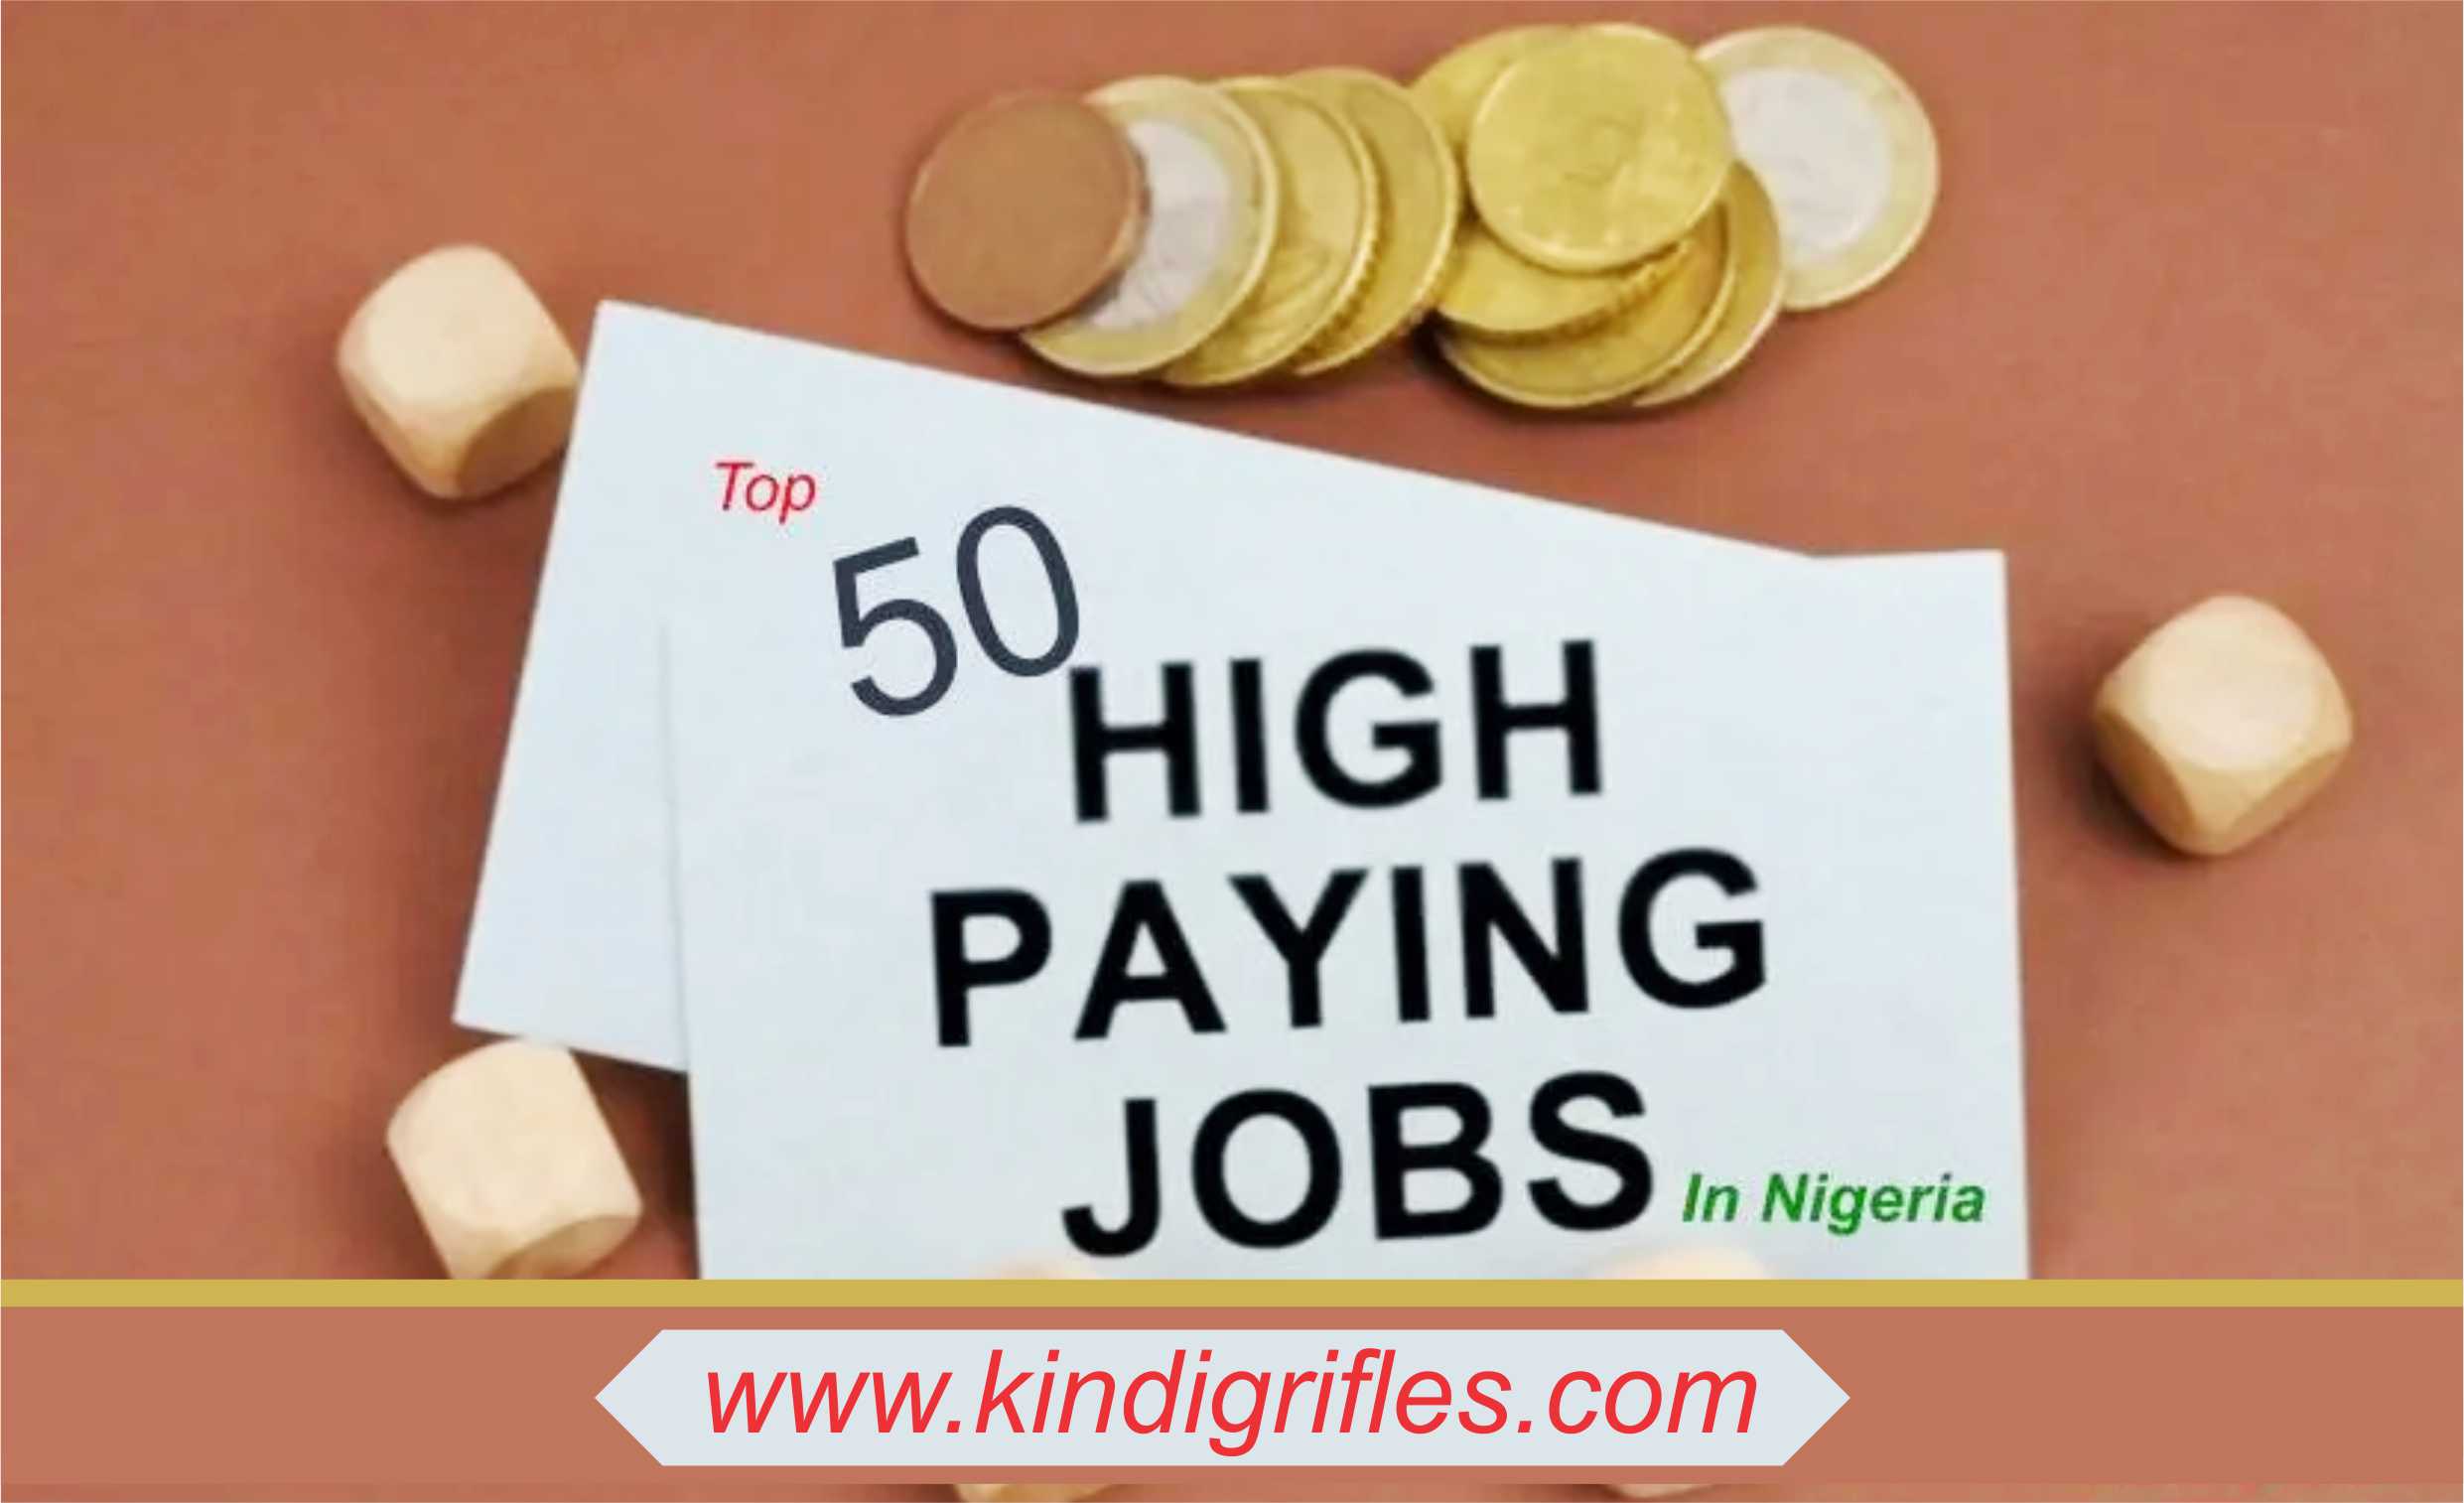 Top 50 Highest Paying Jobs In Nigeria